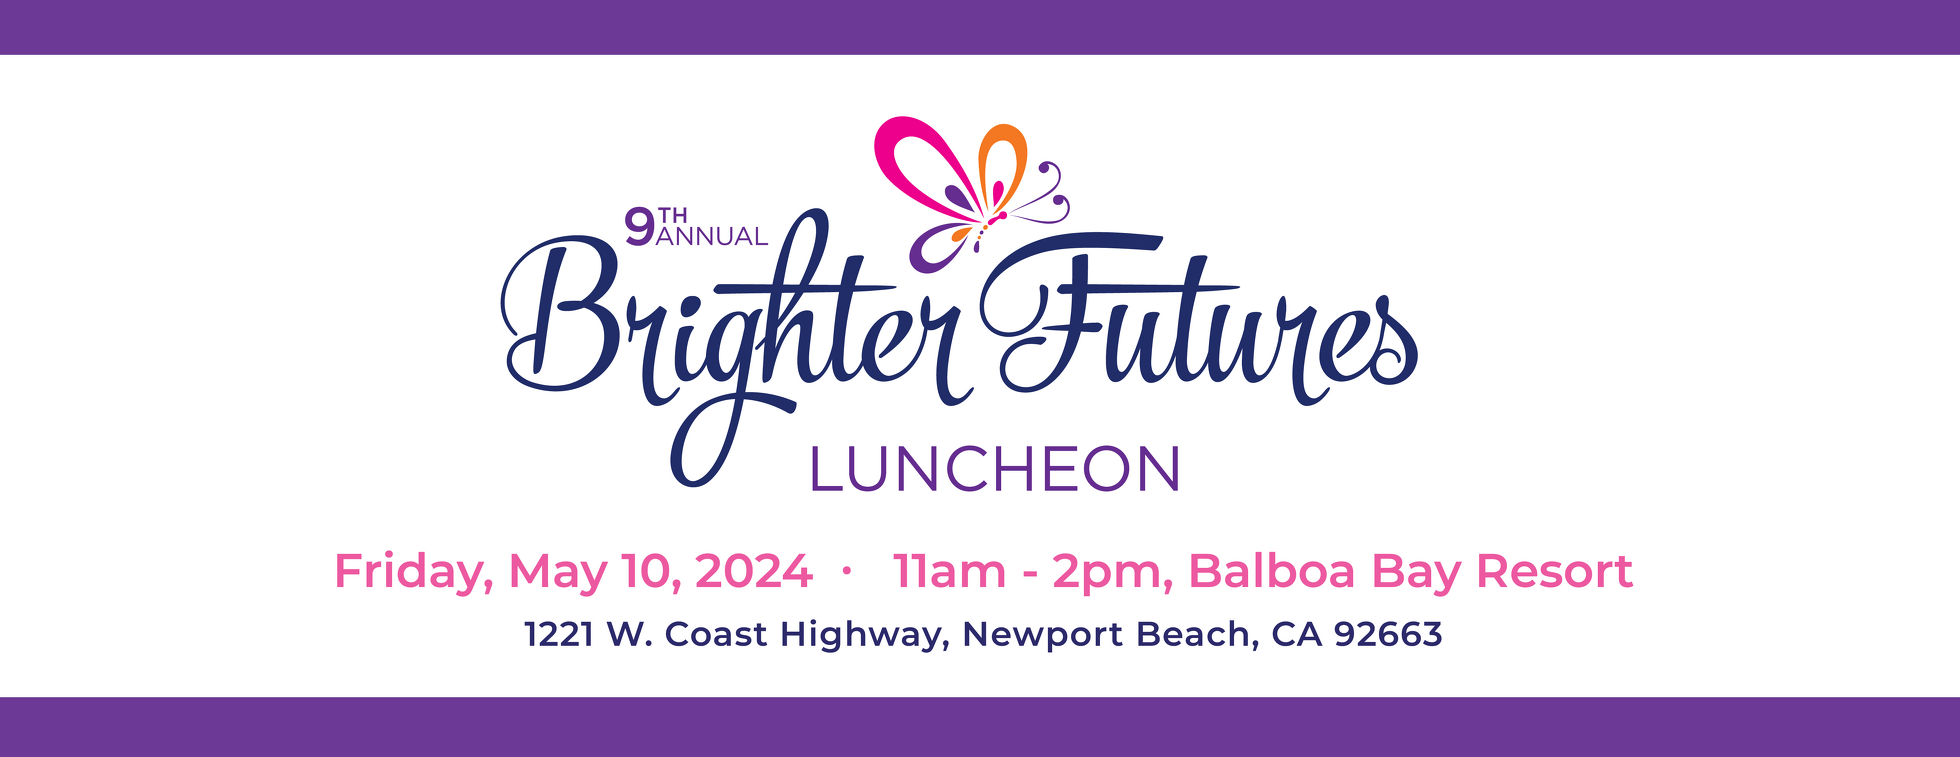 Brighter Futures Luncheon 2024